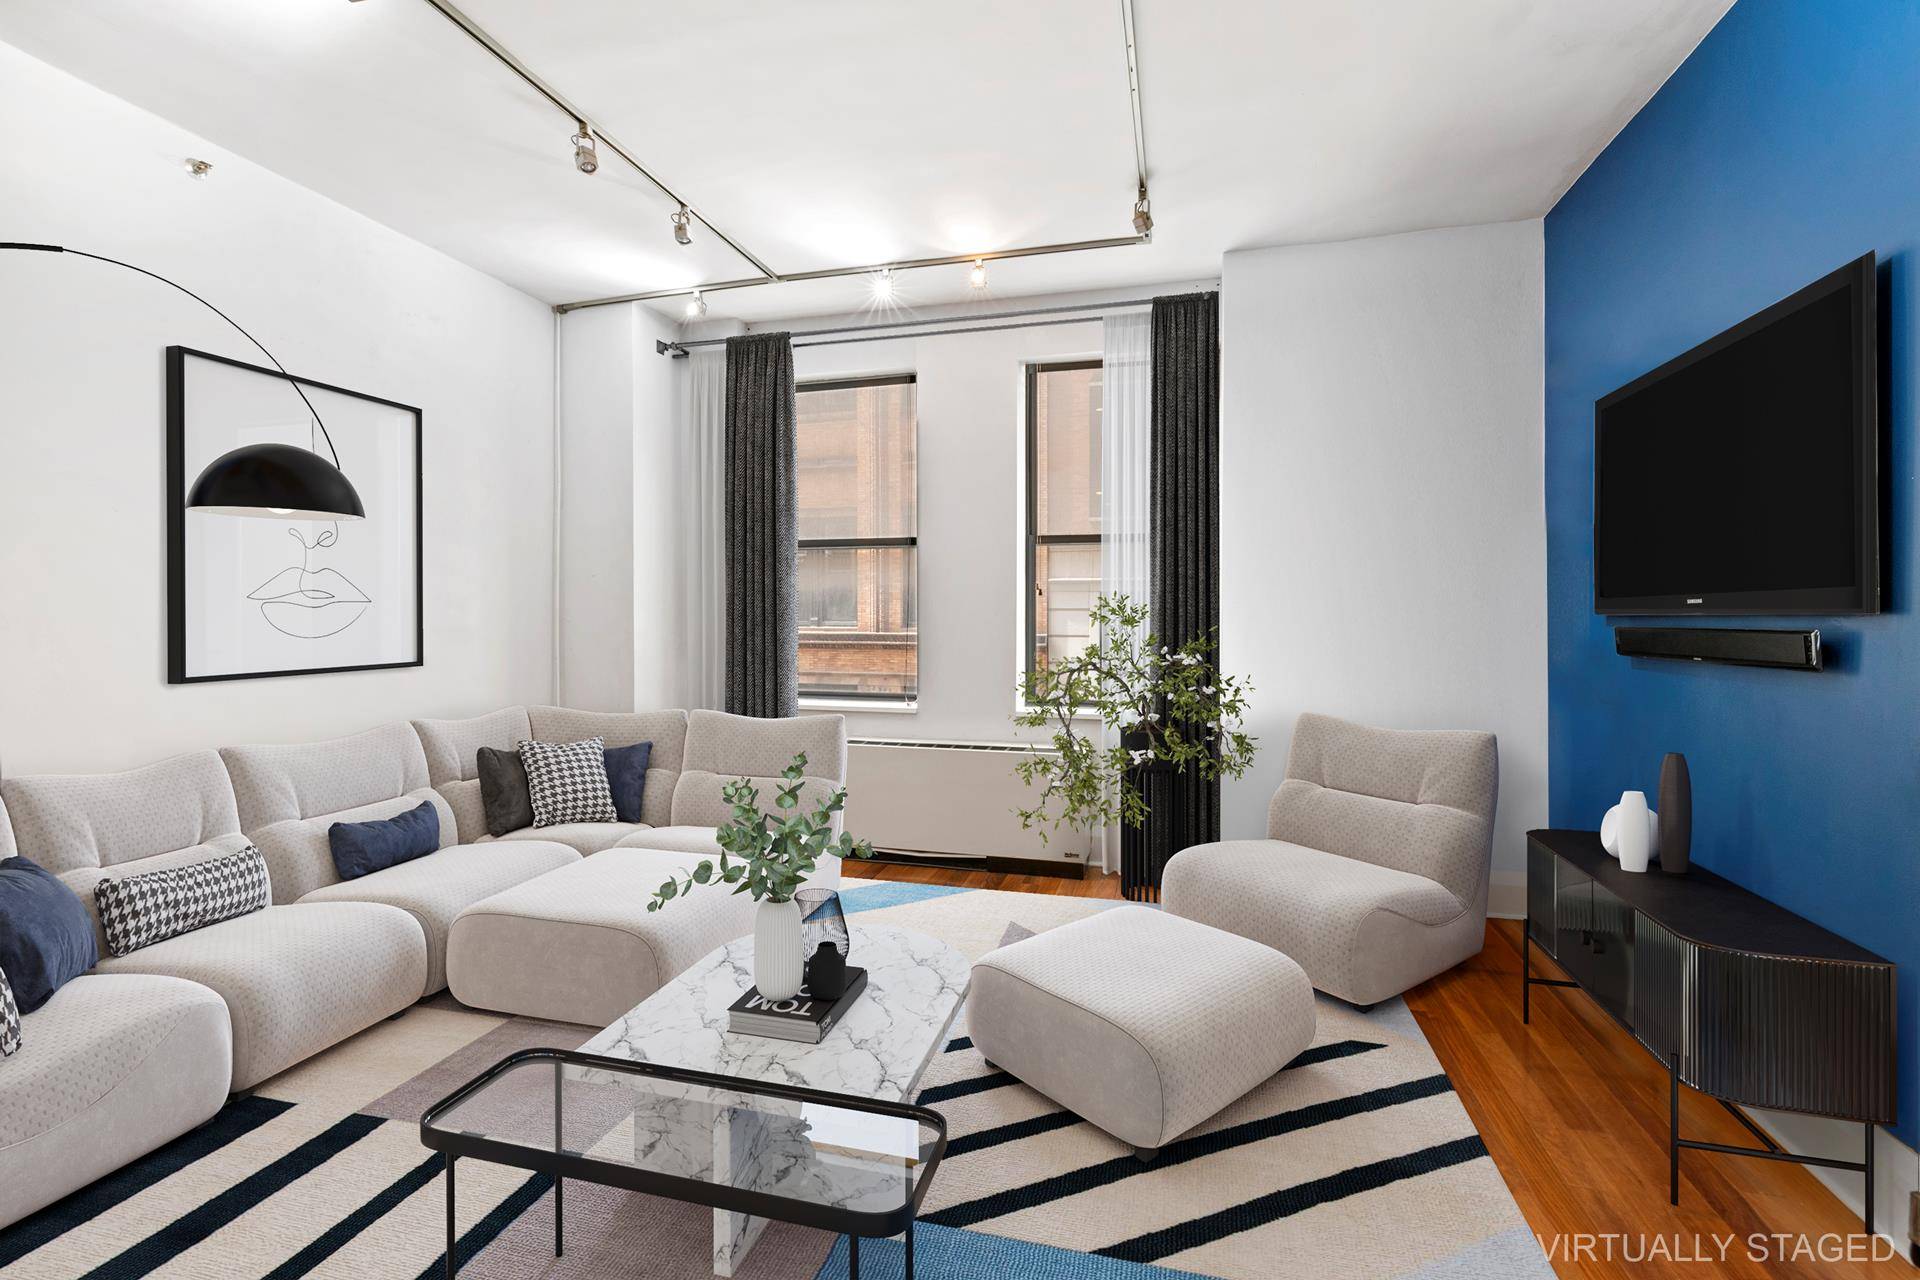 This gracious one bedroom loft features a generously proportioned living room perfect for entertaining, while the dual over sized windows and exposed metal beam adds New York charm and character.